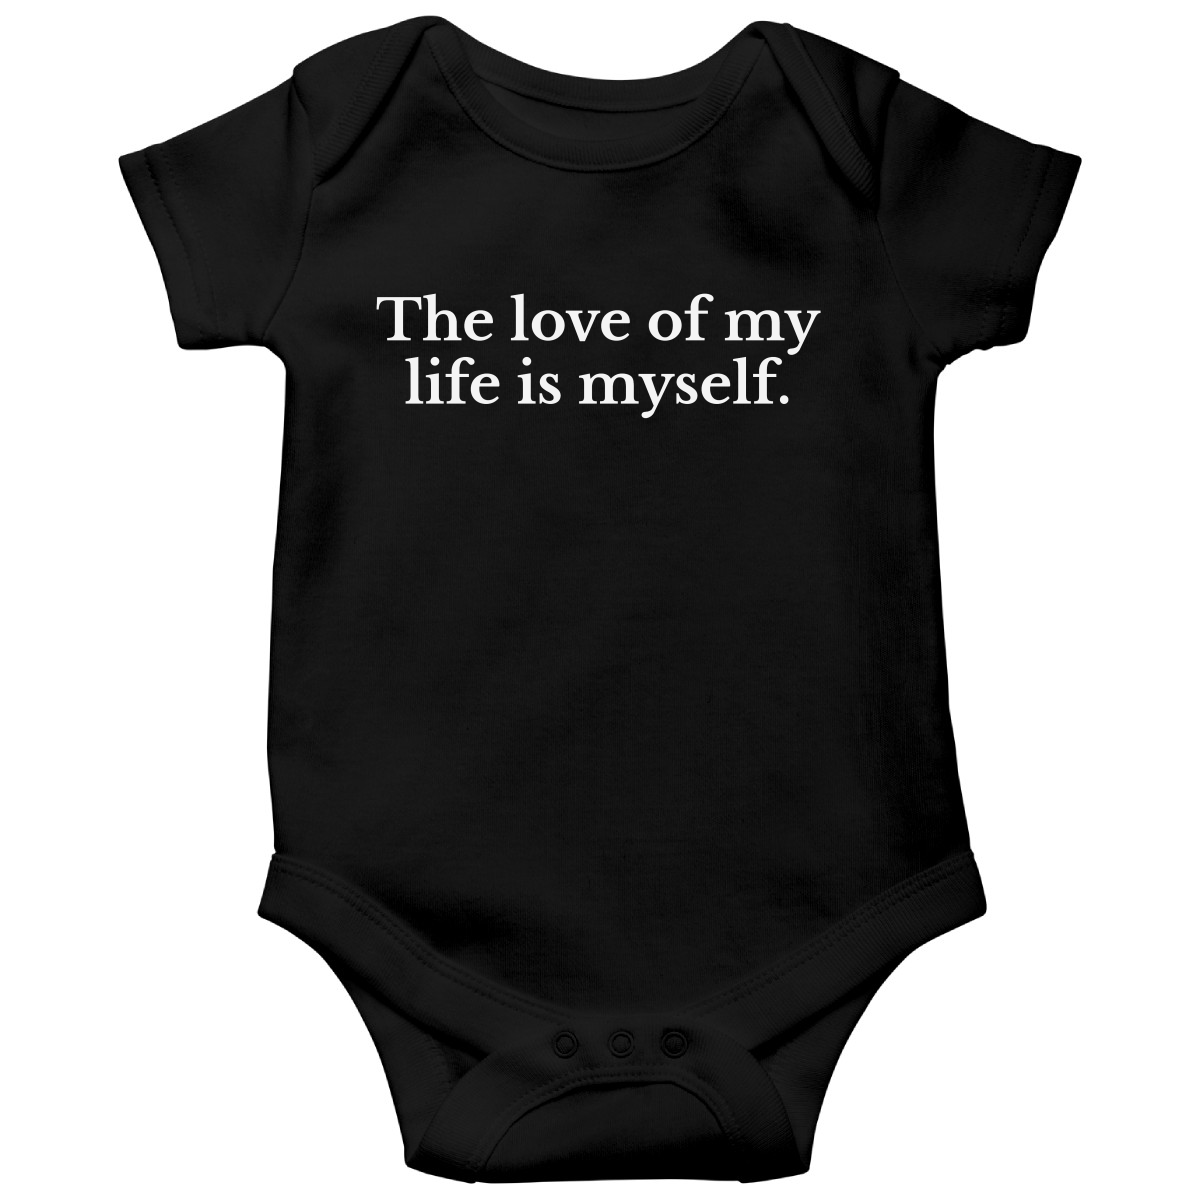 The love of my life is myself Baby Bodysuits | Black